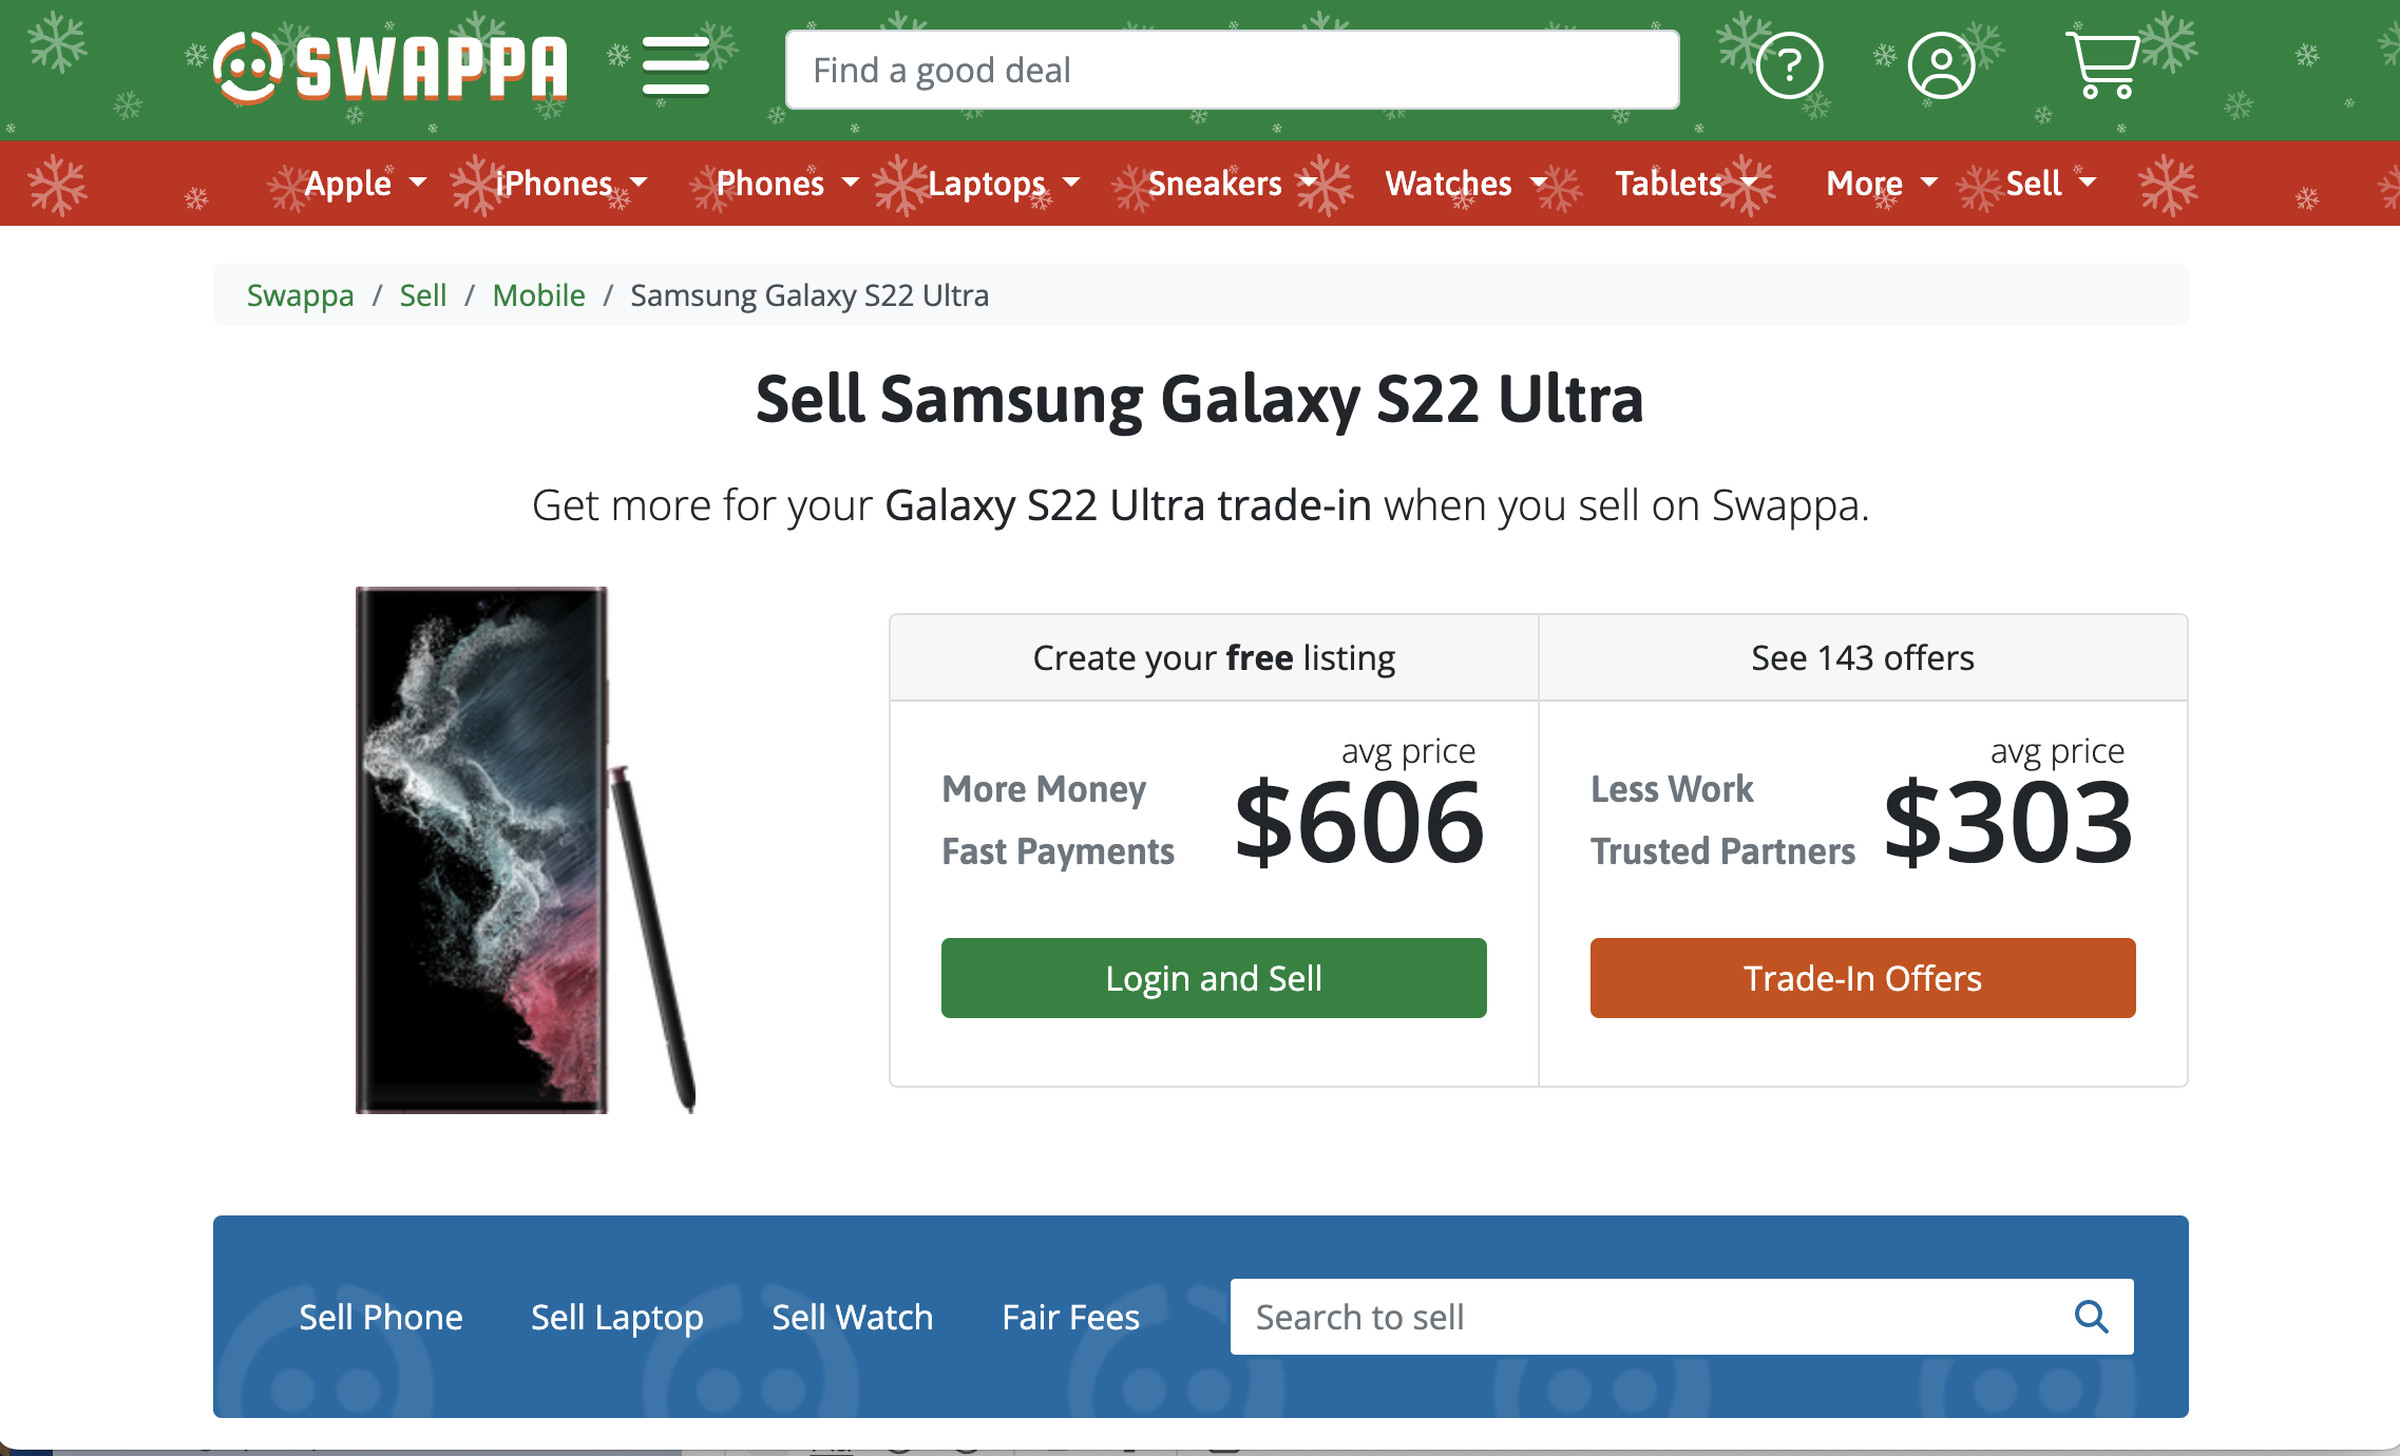 Swappa page headed Sell Samsung Galaxy S22 Ultra with a photo of the phone on the left and two boxes, one showing a price of $606 and the other showing a price of $303.